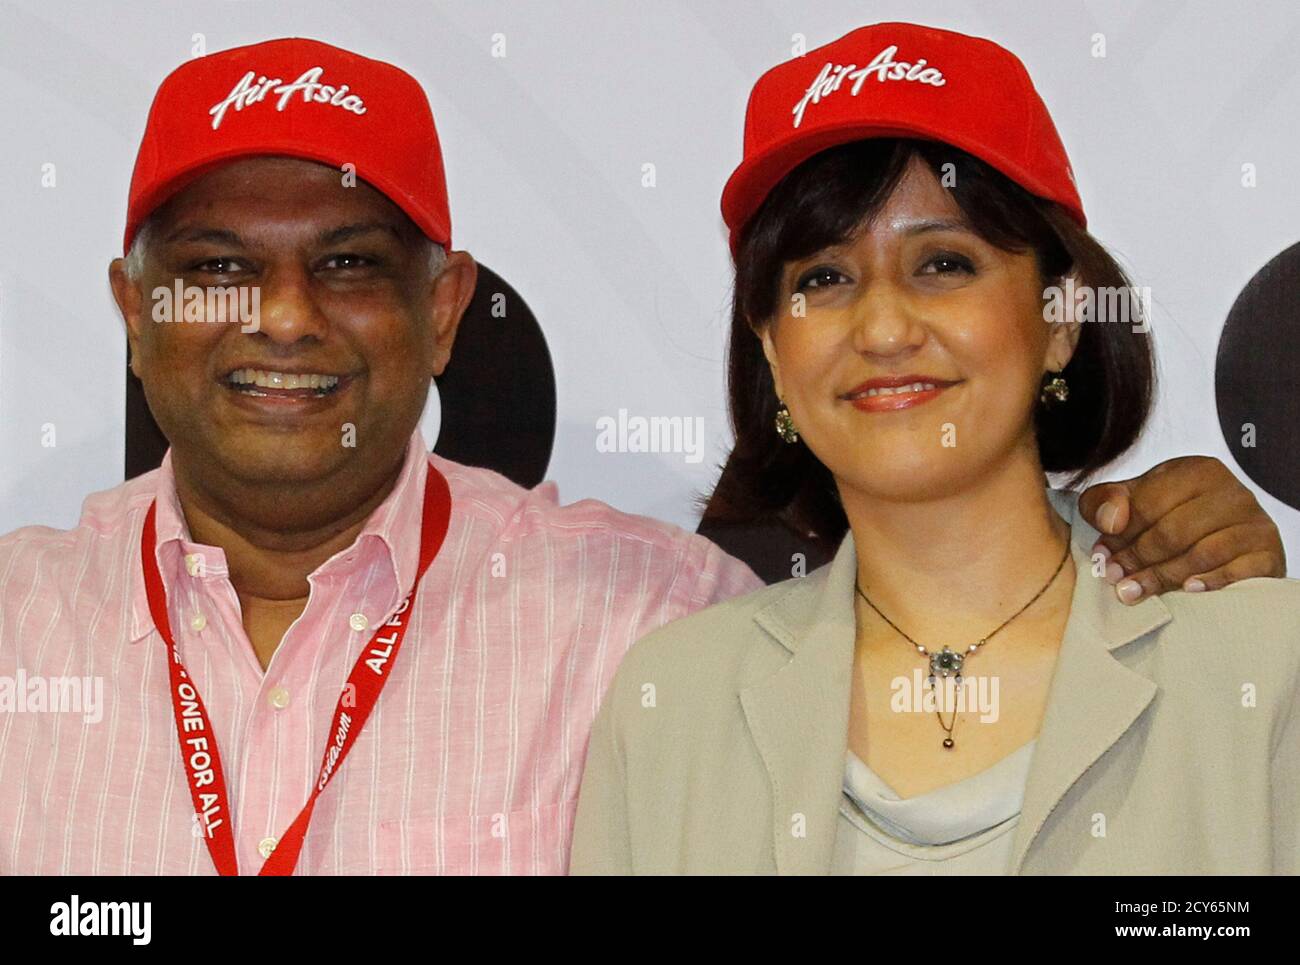 Airasia Malaysia High Resolution Stock Photography And Images Alamy